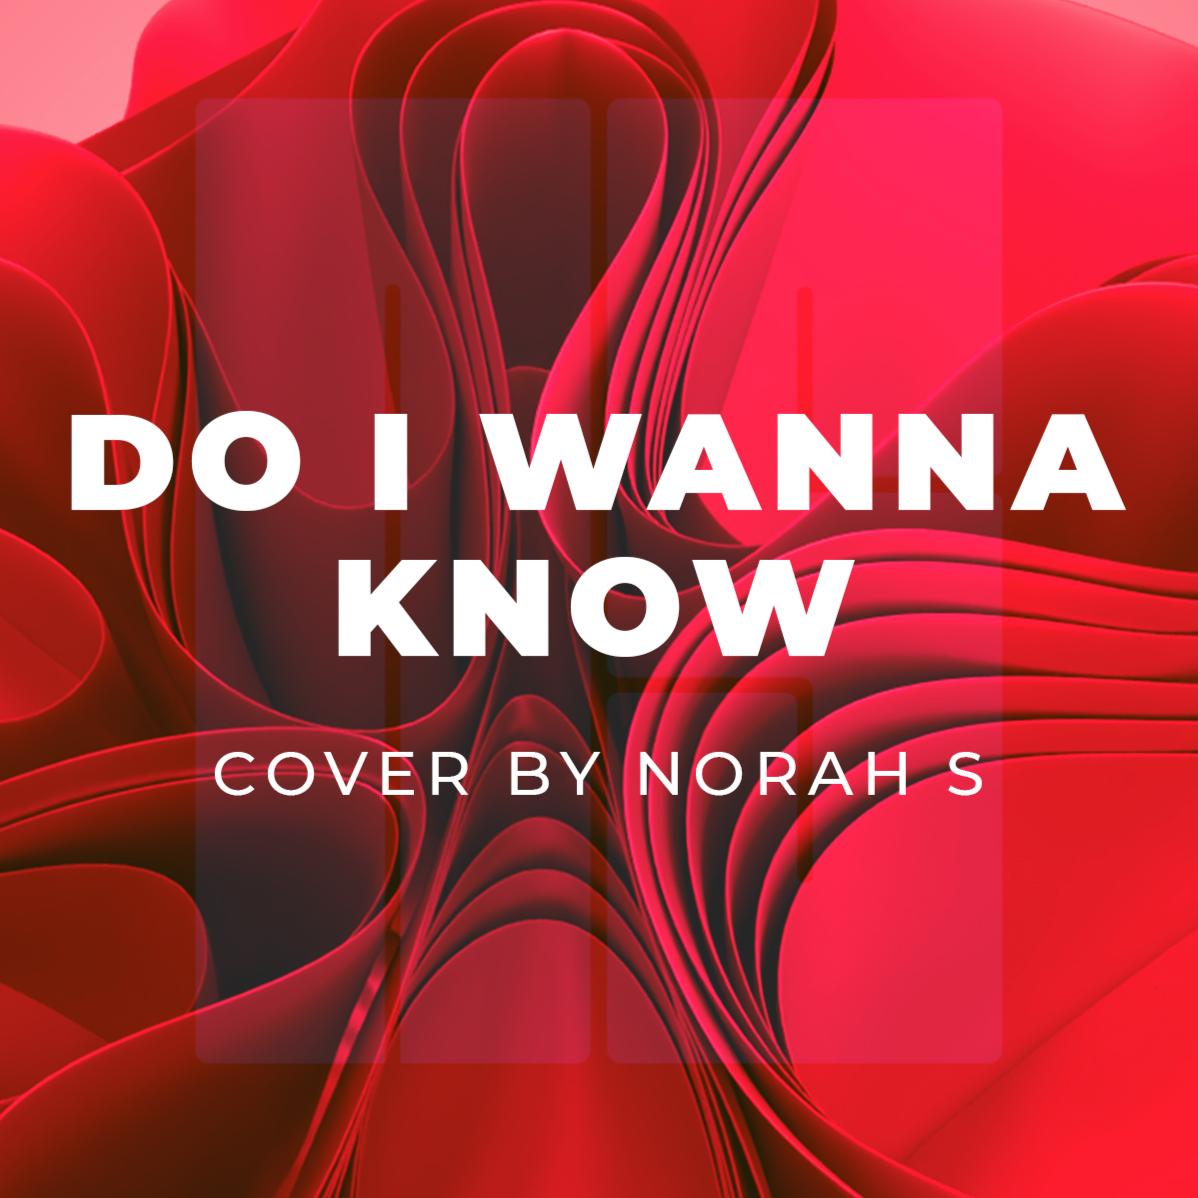 Do I wanna know - short cover by Norah